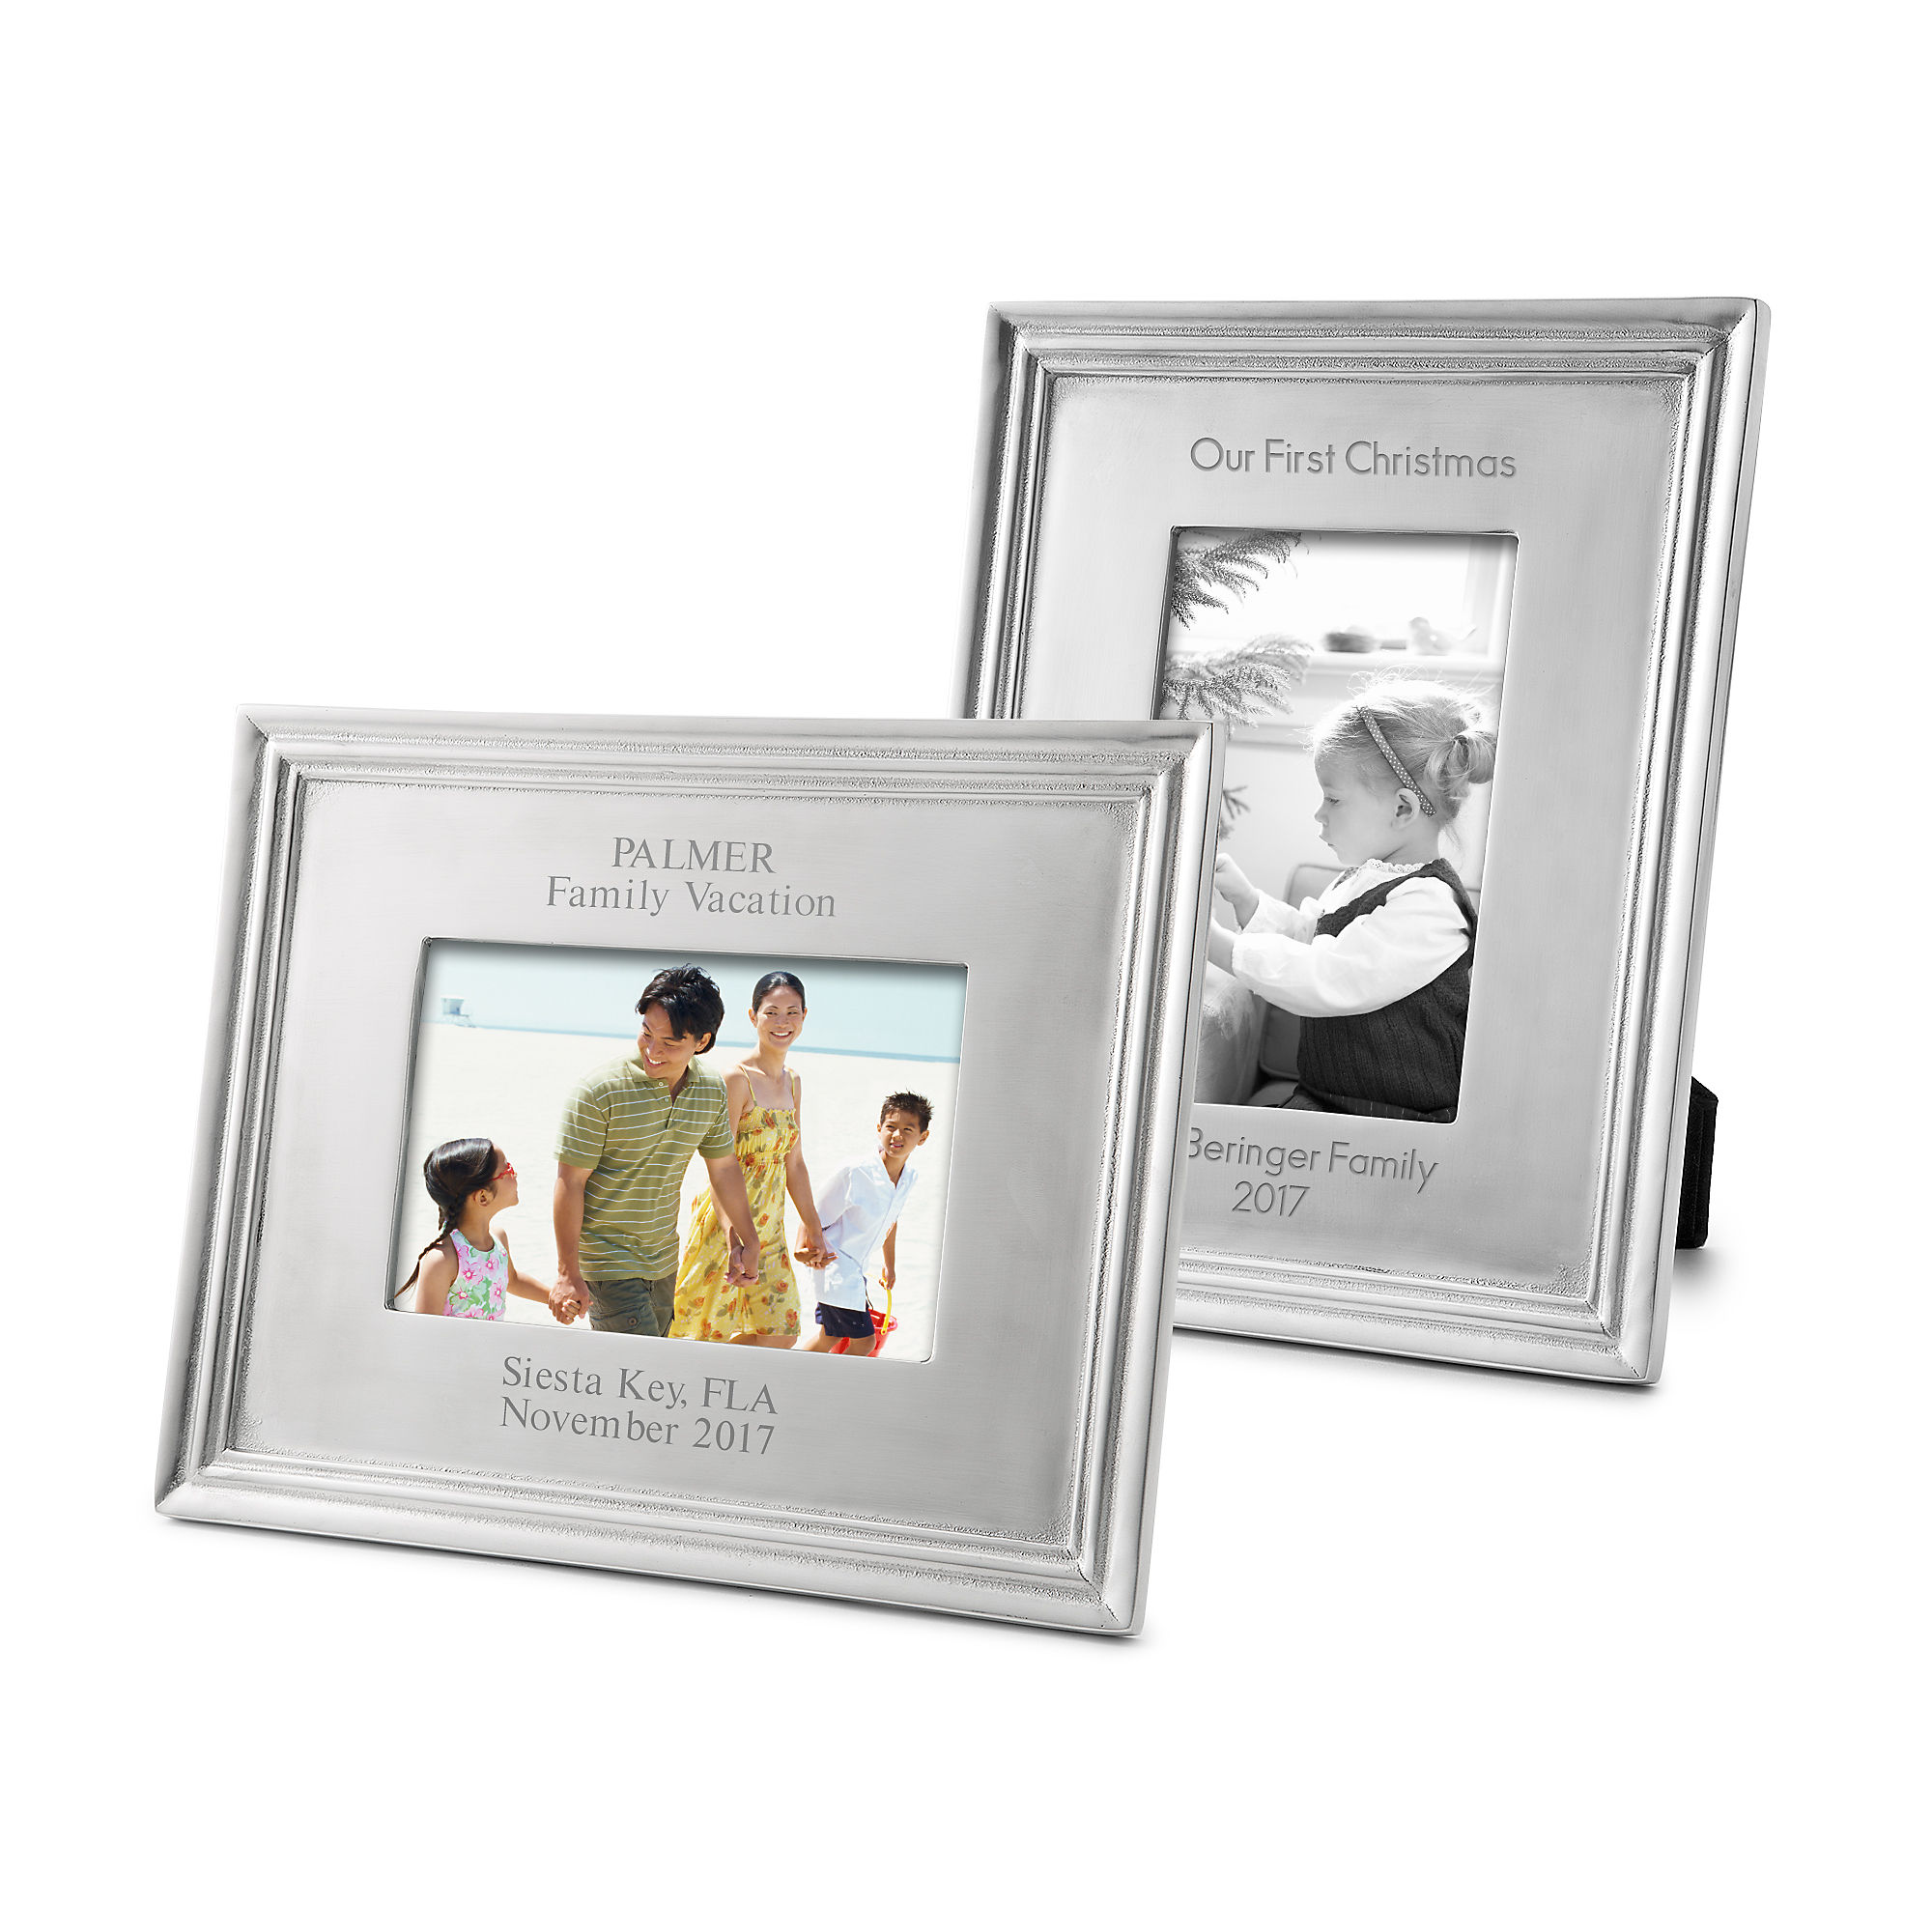 MARIPOSA Basketweave Silver 4x6 inch Picture Frame 